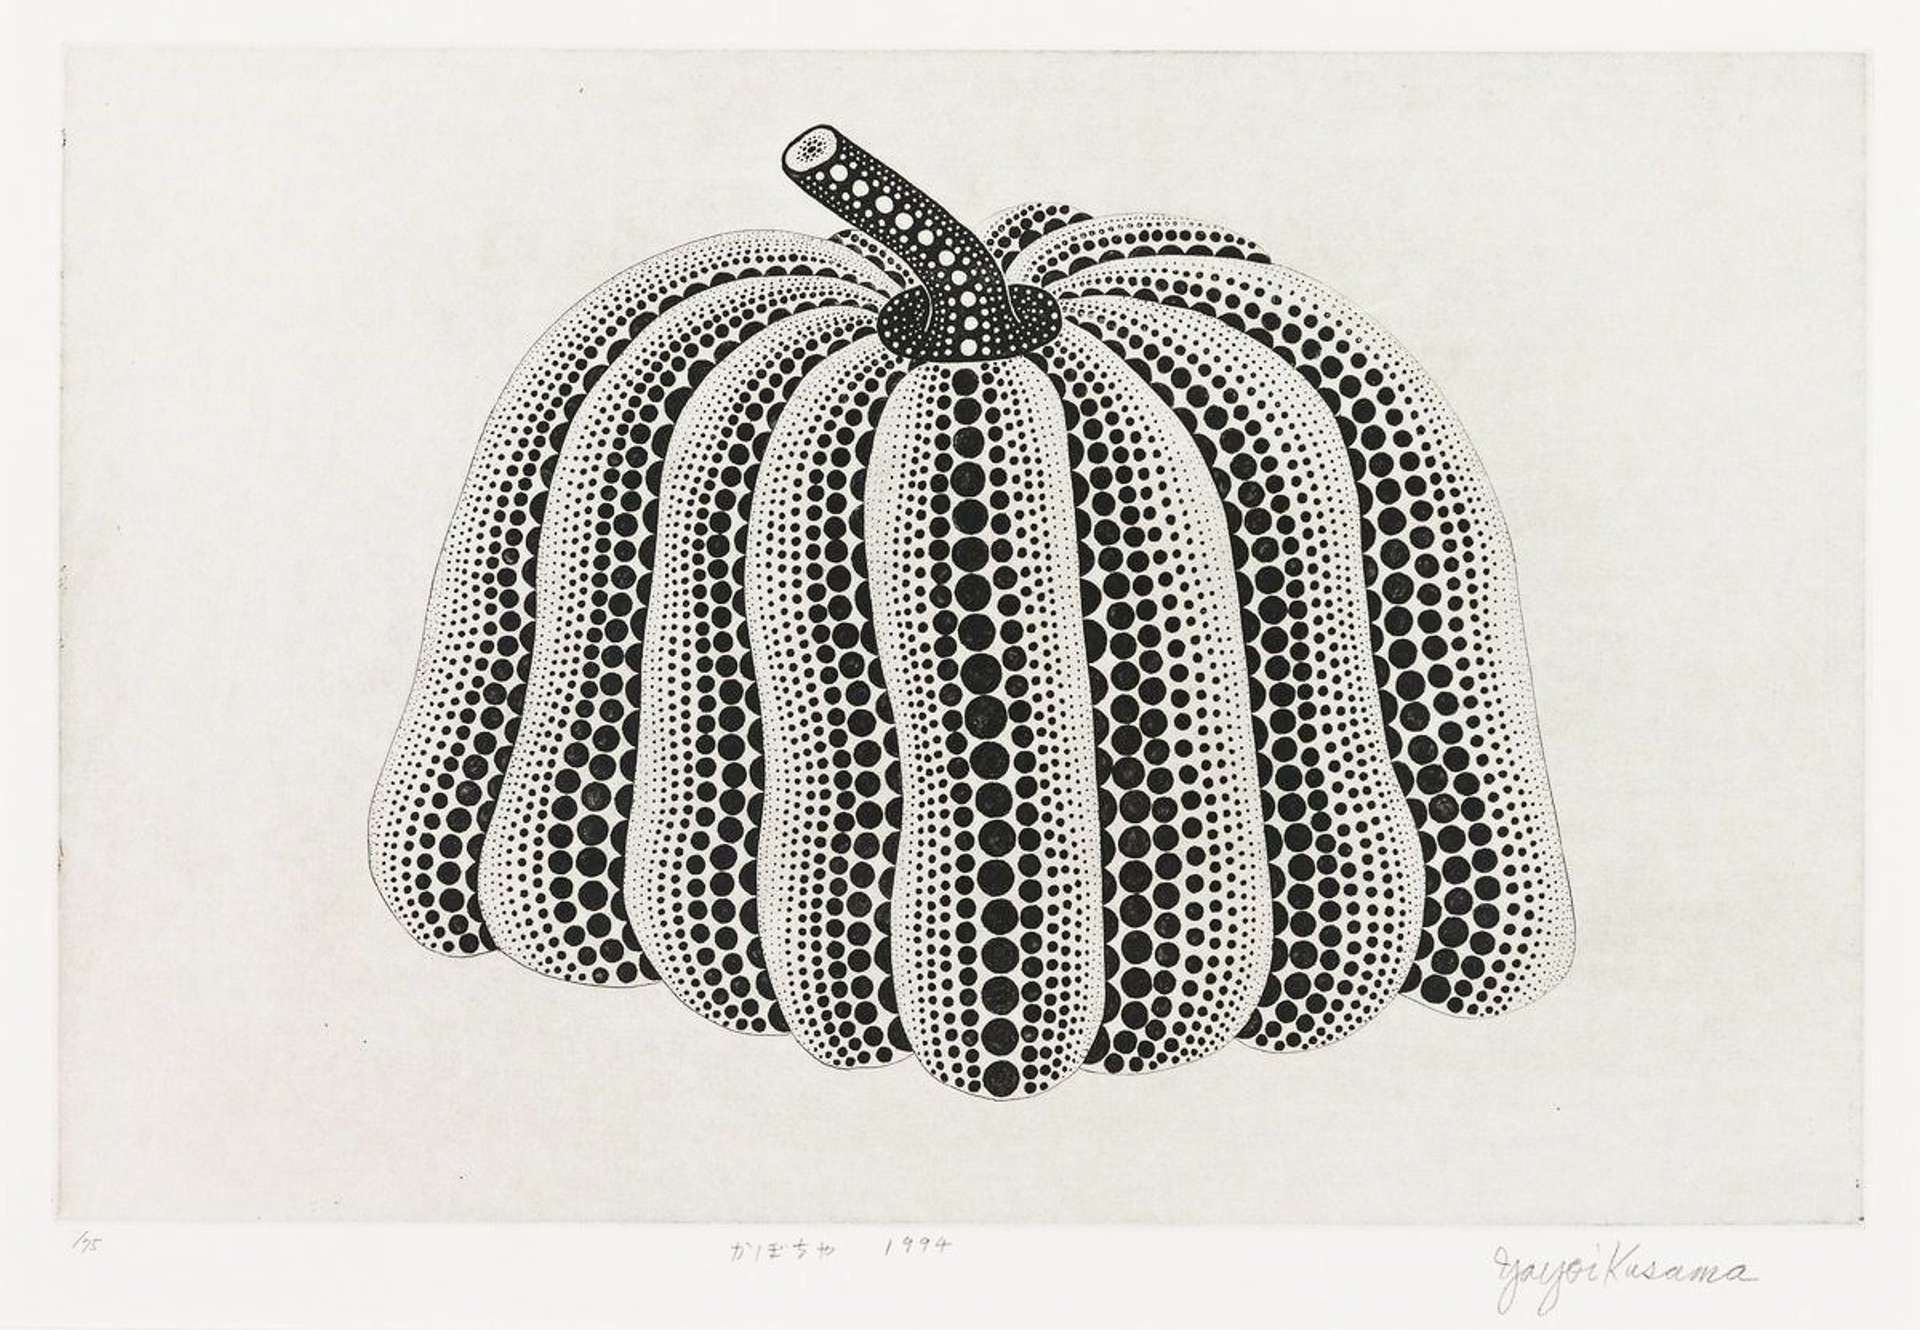  Yayoi Kusama's Pumpkin (black and white). An etching of a pumpkin created out of a pattern of black and white polka dots against a white background